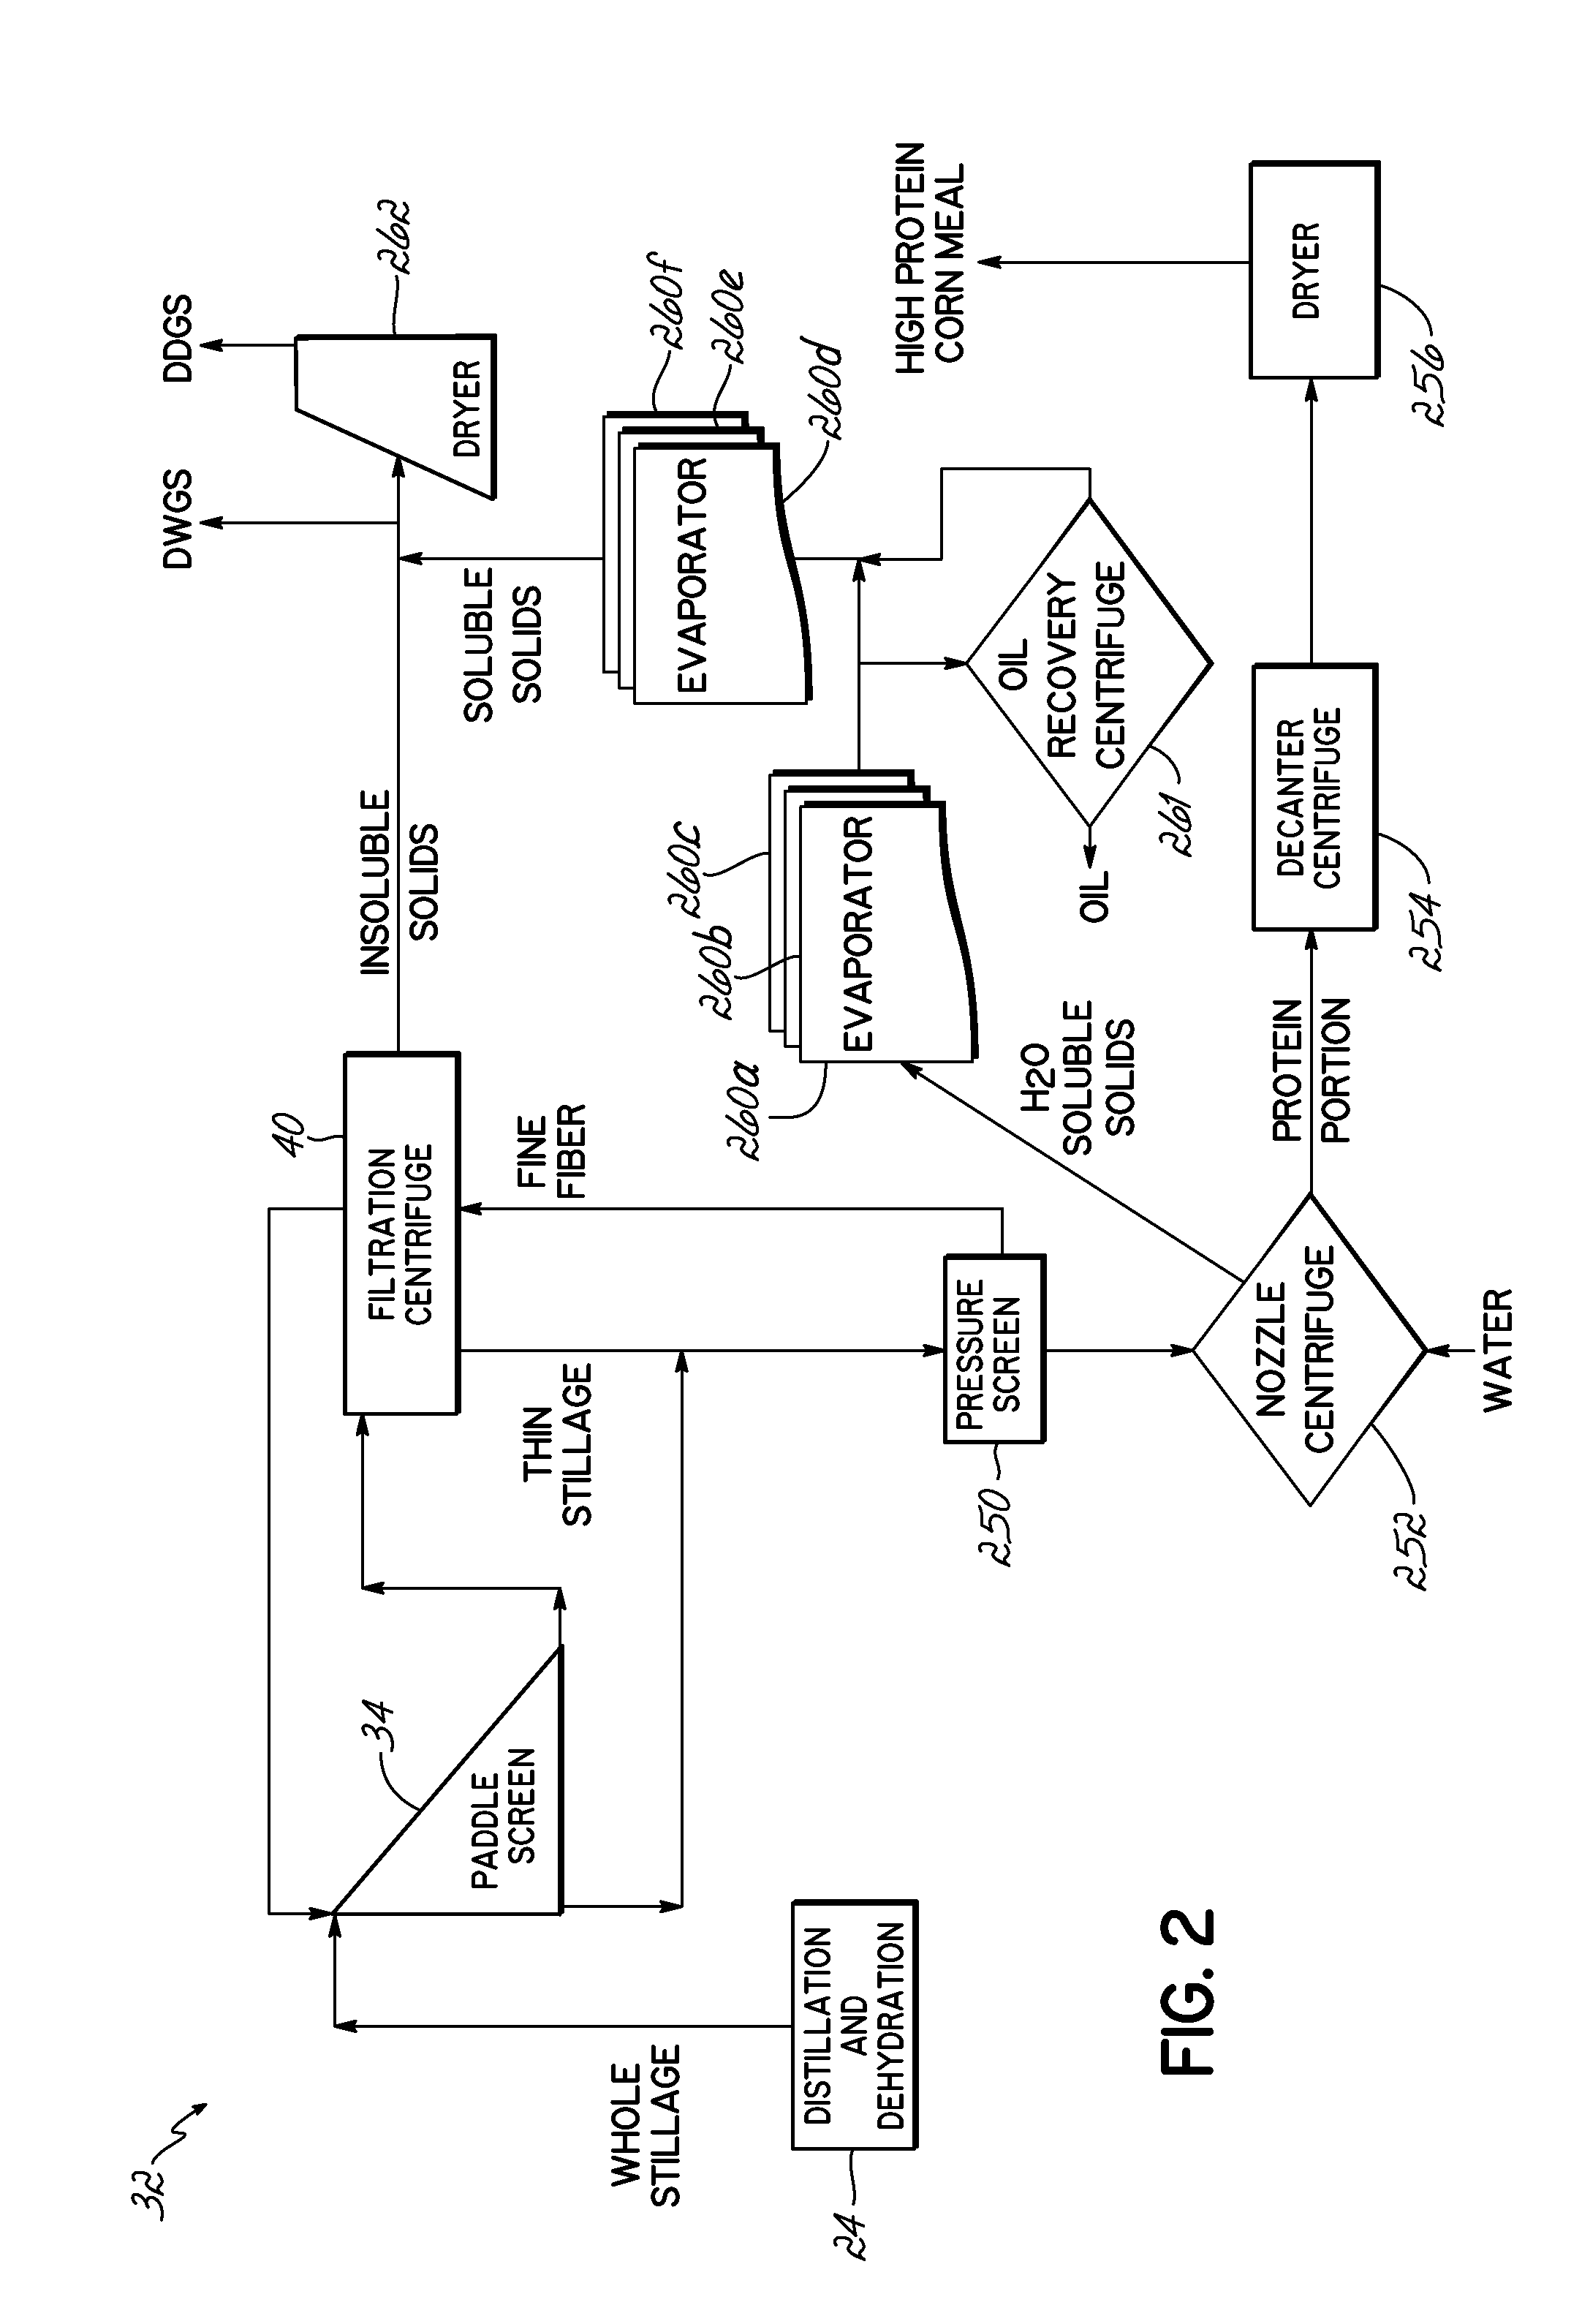 Methods for producing a high protein corn meal from a whole stillage byproduct